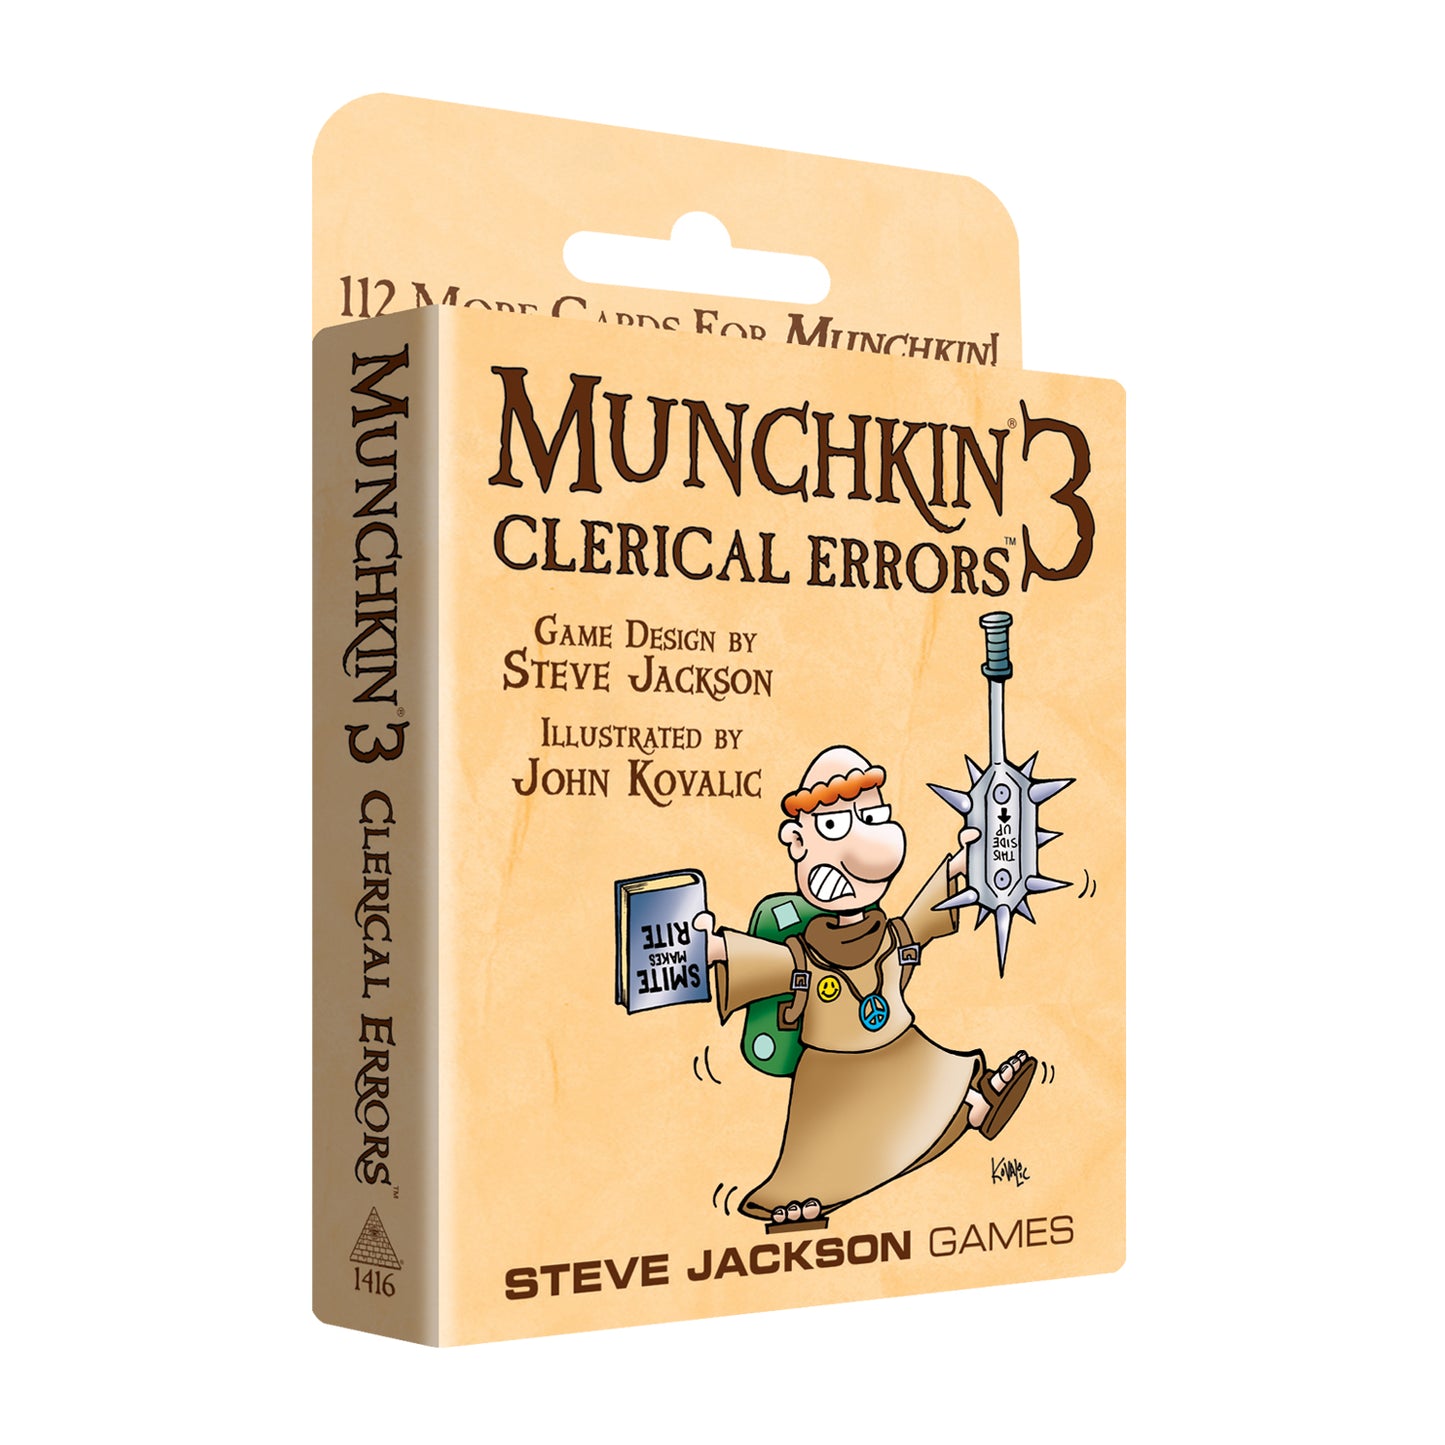 Munchkin 3 Clerical Errors - Card Games - Game On